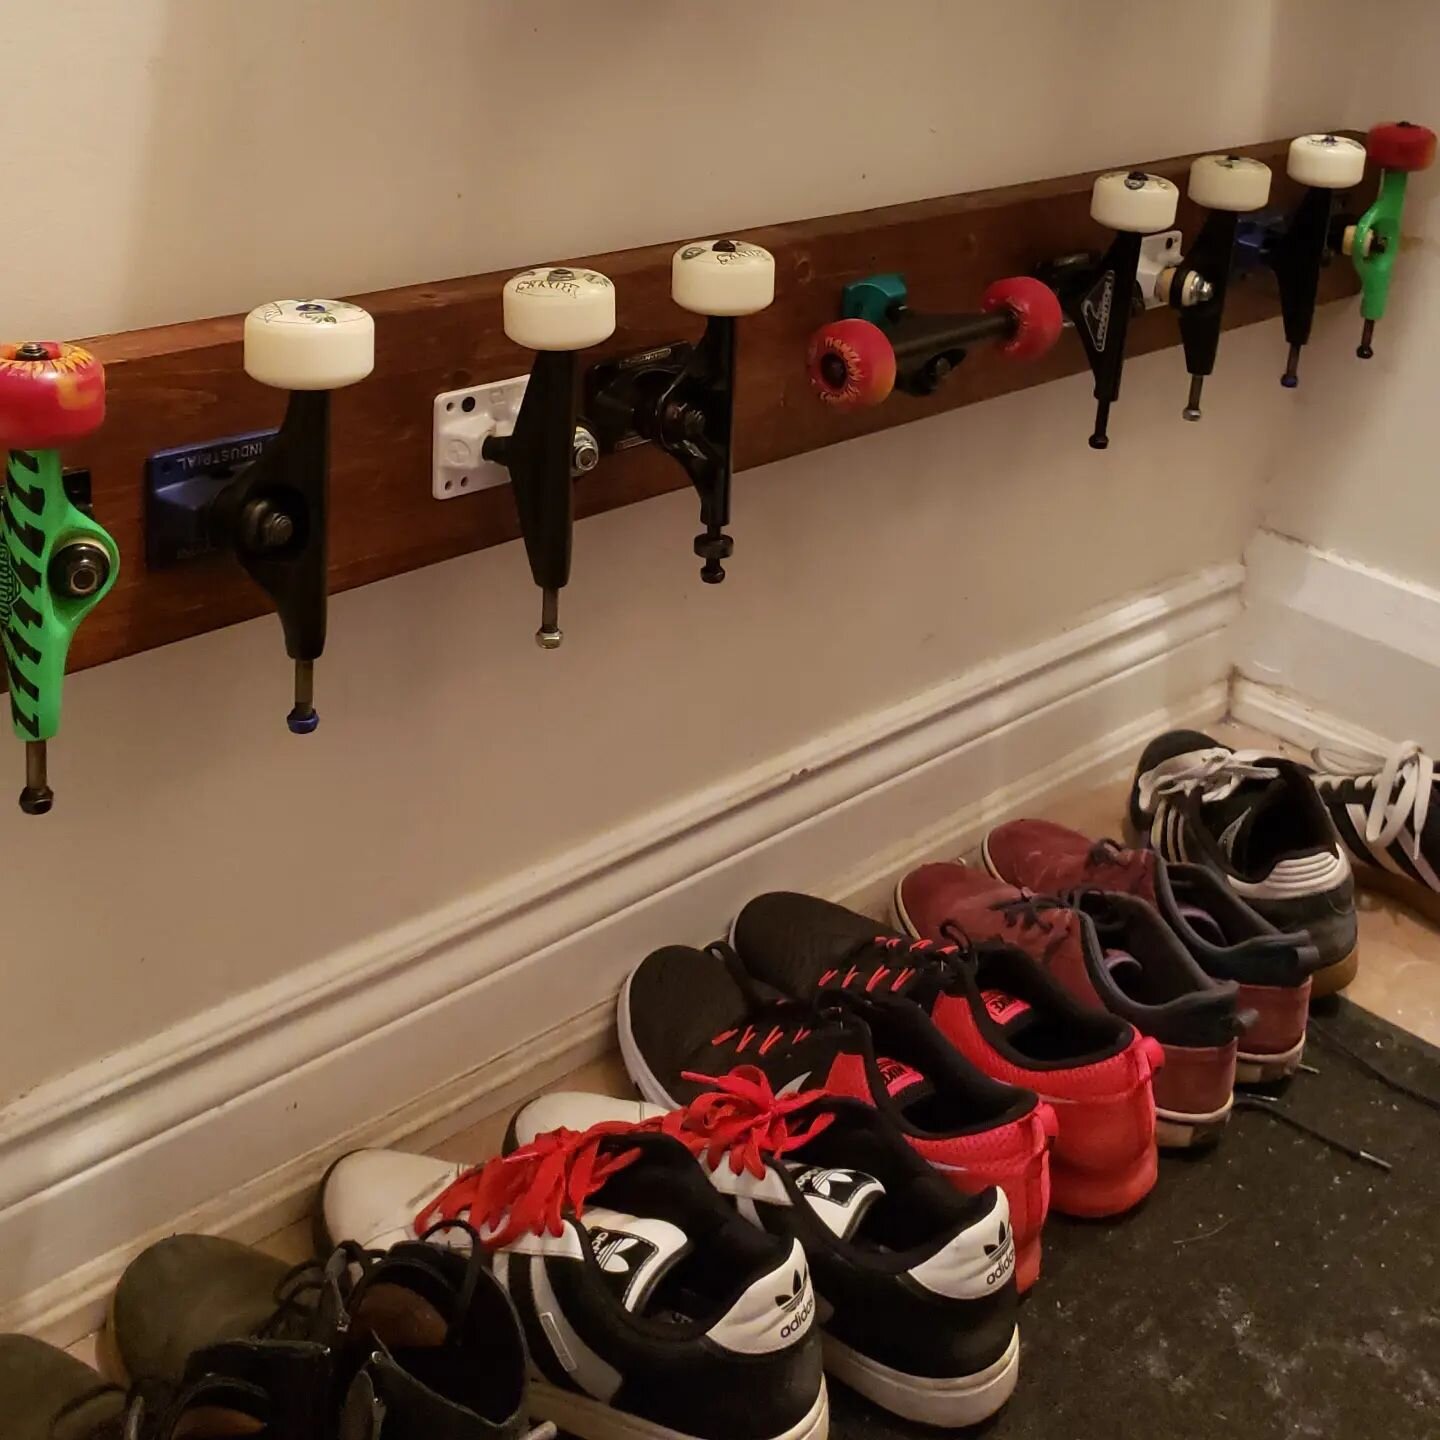 Skater shoe rack progress shots I dug up from 2018. Still one of my favourites!

Even includes my original Spitfire wheels from 1999, just had to sand them fresh again.